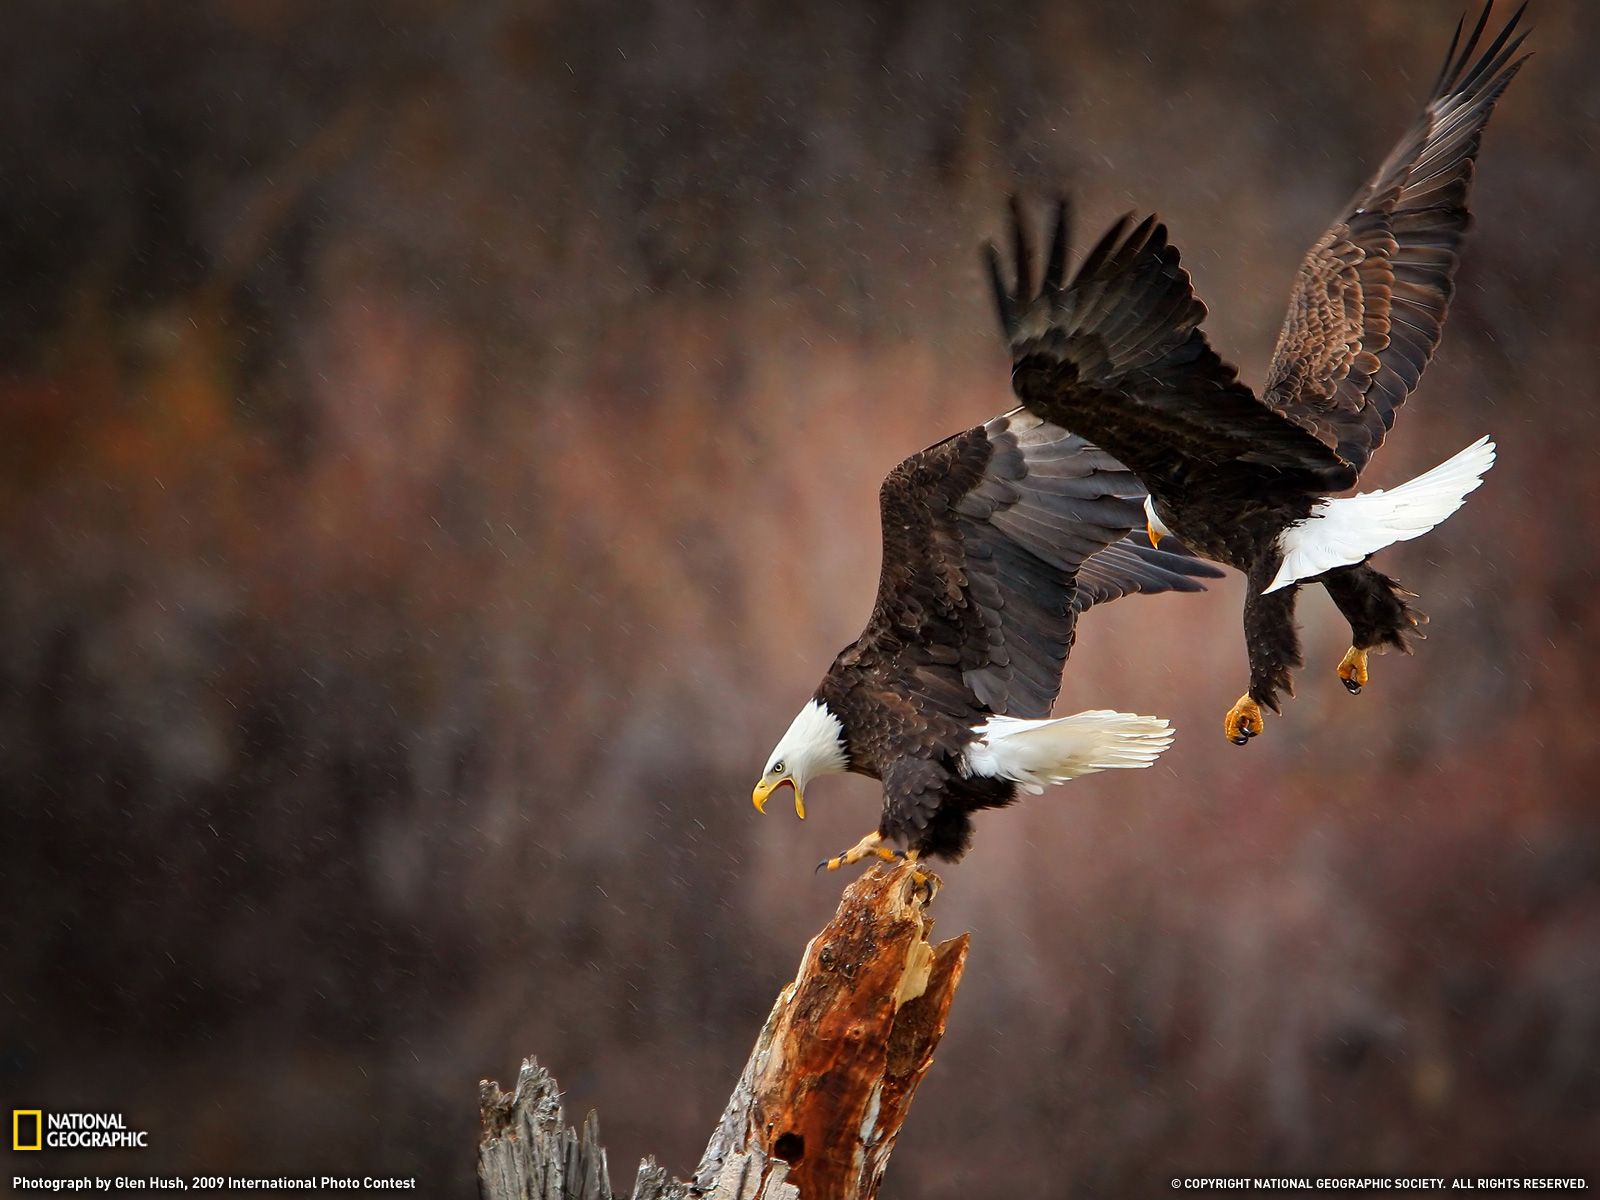 Eagles in flight photo, animal picture, national geographic